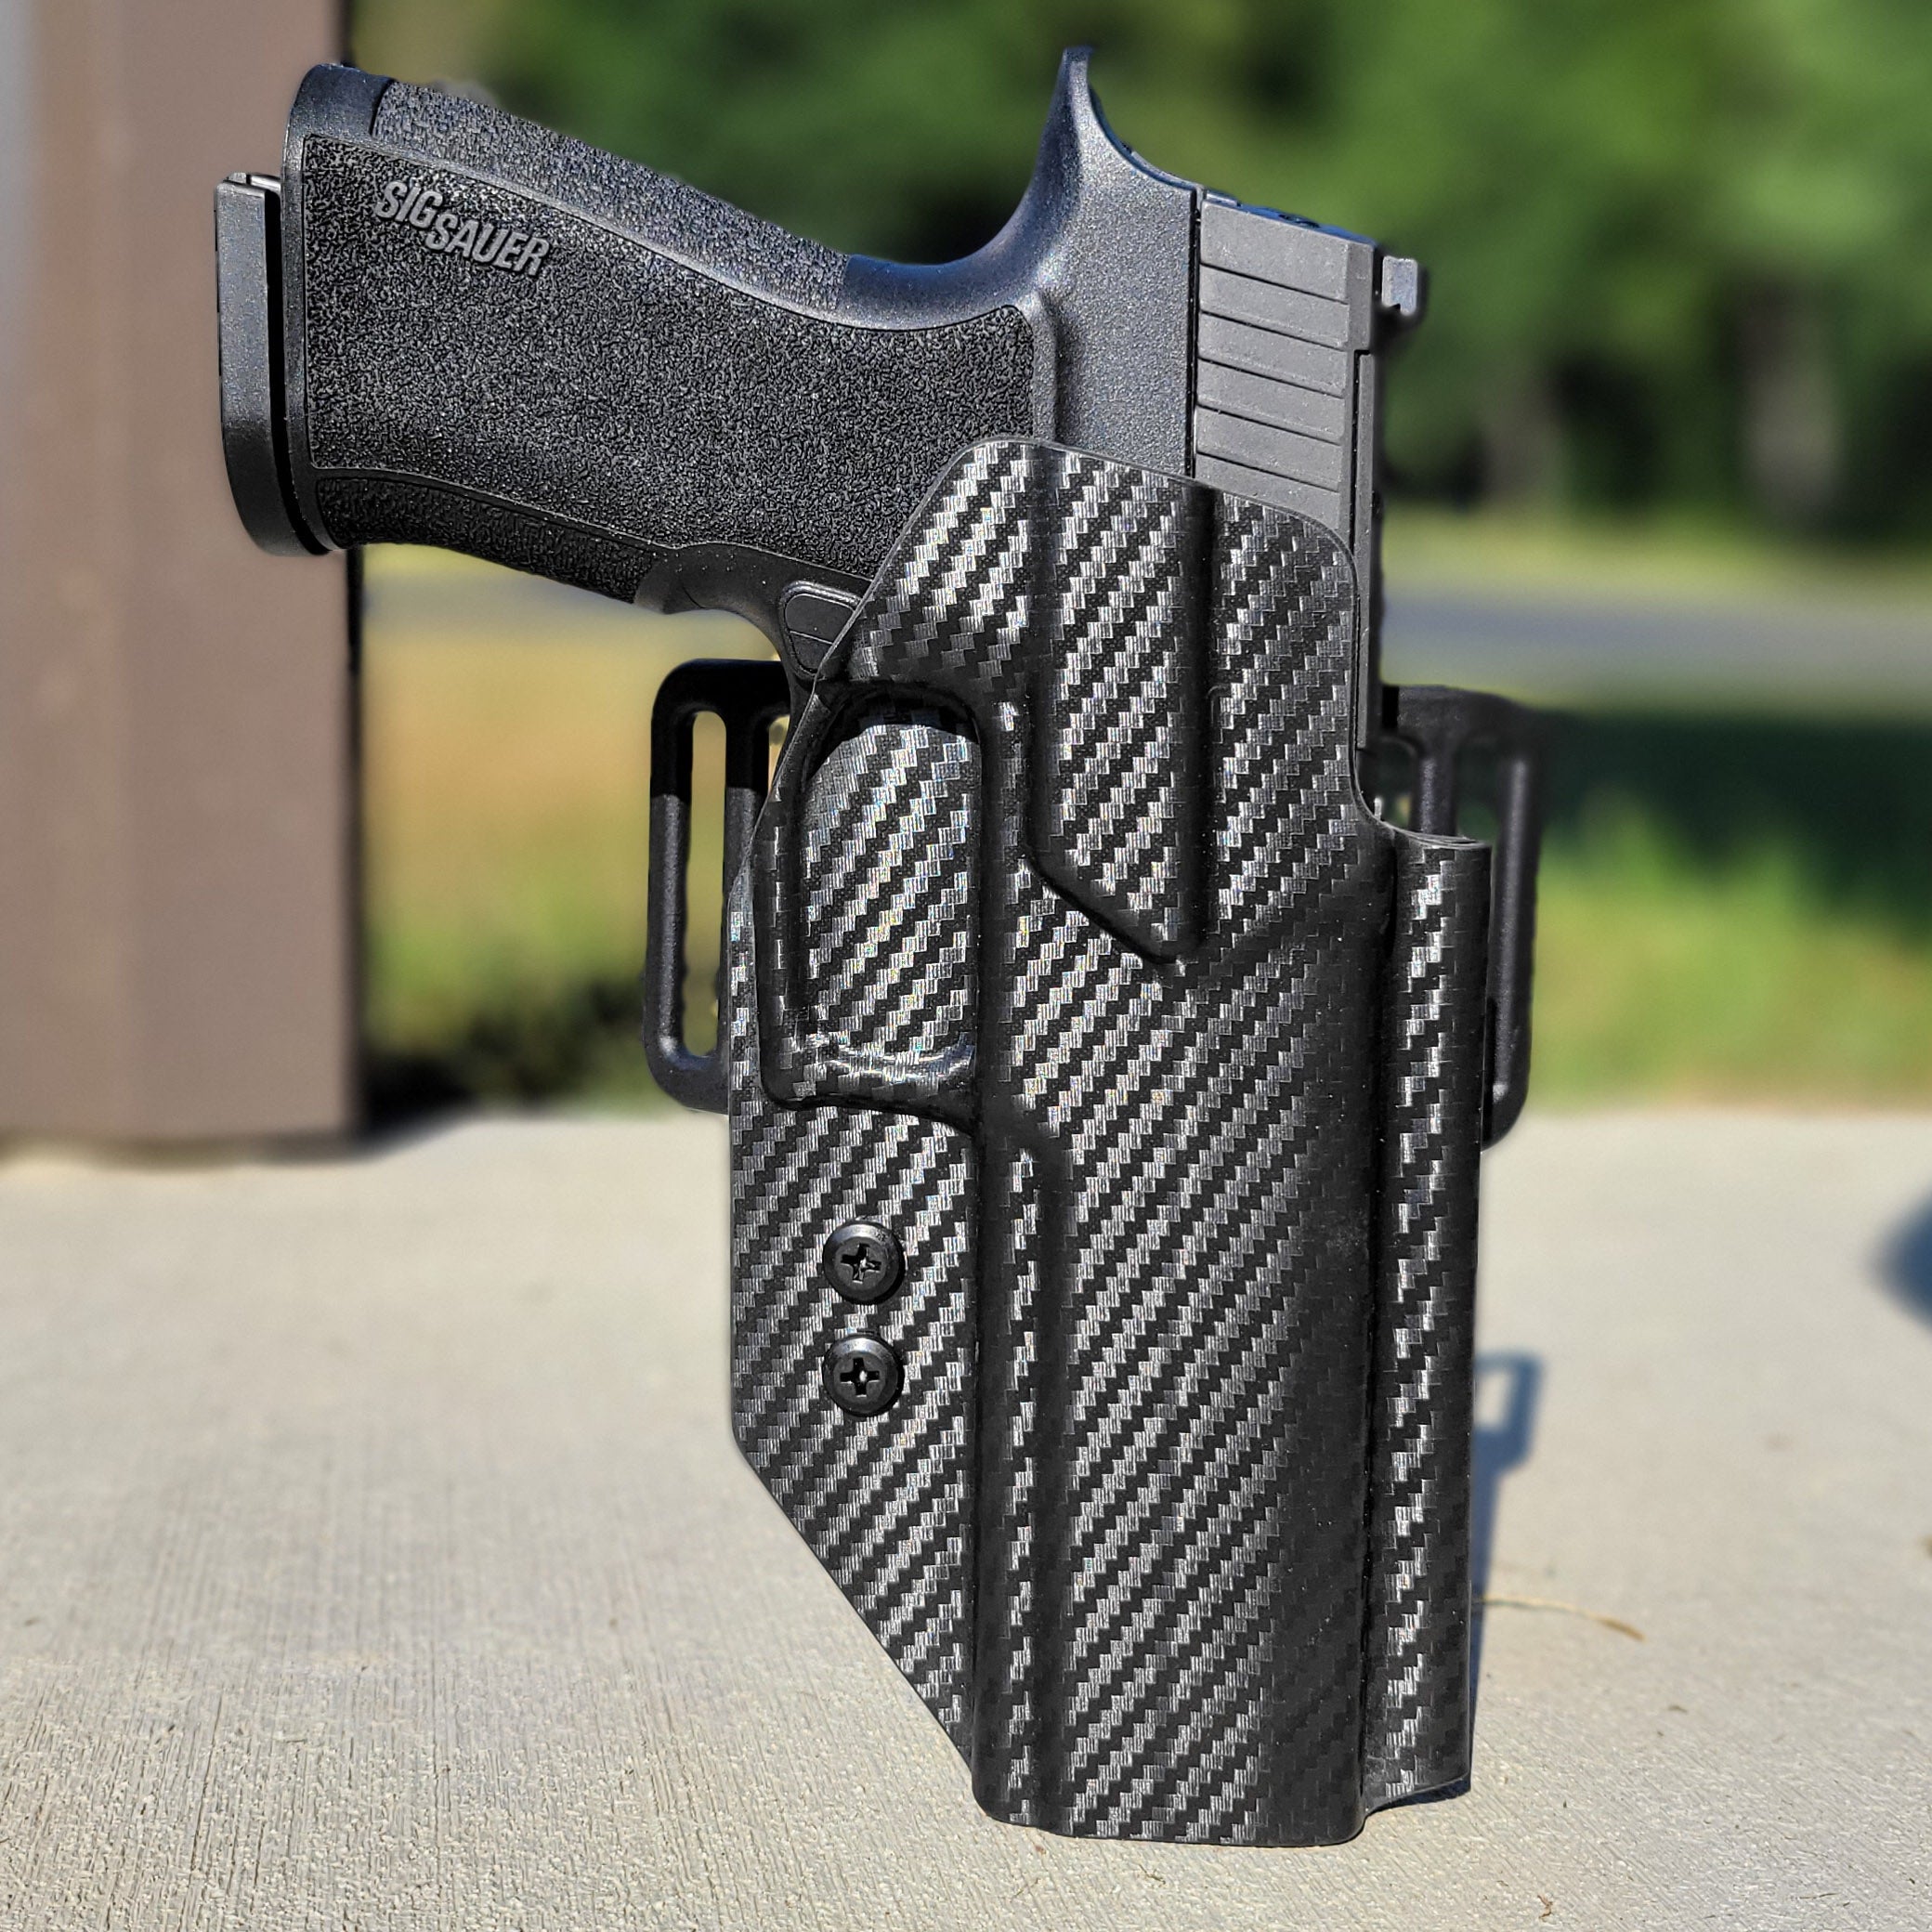 Outside Waistband OWB Kydex Taco Style Holster designed to fit the Sig Sauer 10MM . Full sweat guard, adjustable retention, open muzzle, and profiled for a red dot sight. Proudly made in the USA for veterans and law enforcement. 10 MM P320-XTEN, P320 X Ten or P 320 XTEN.